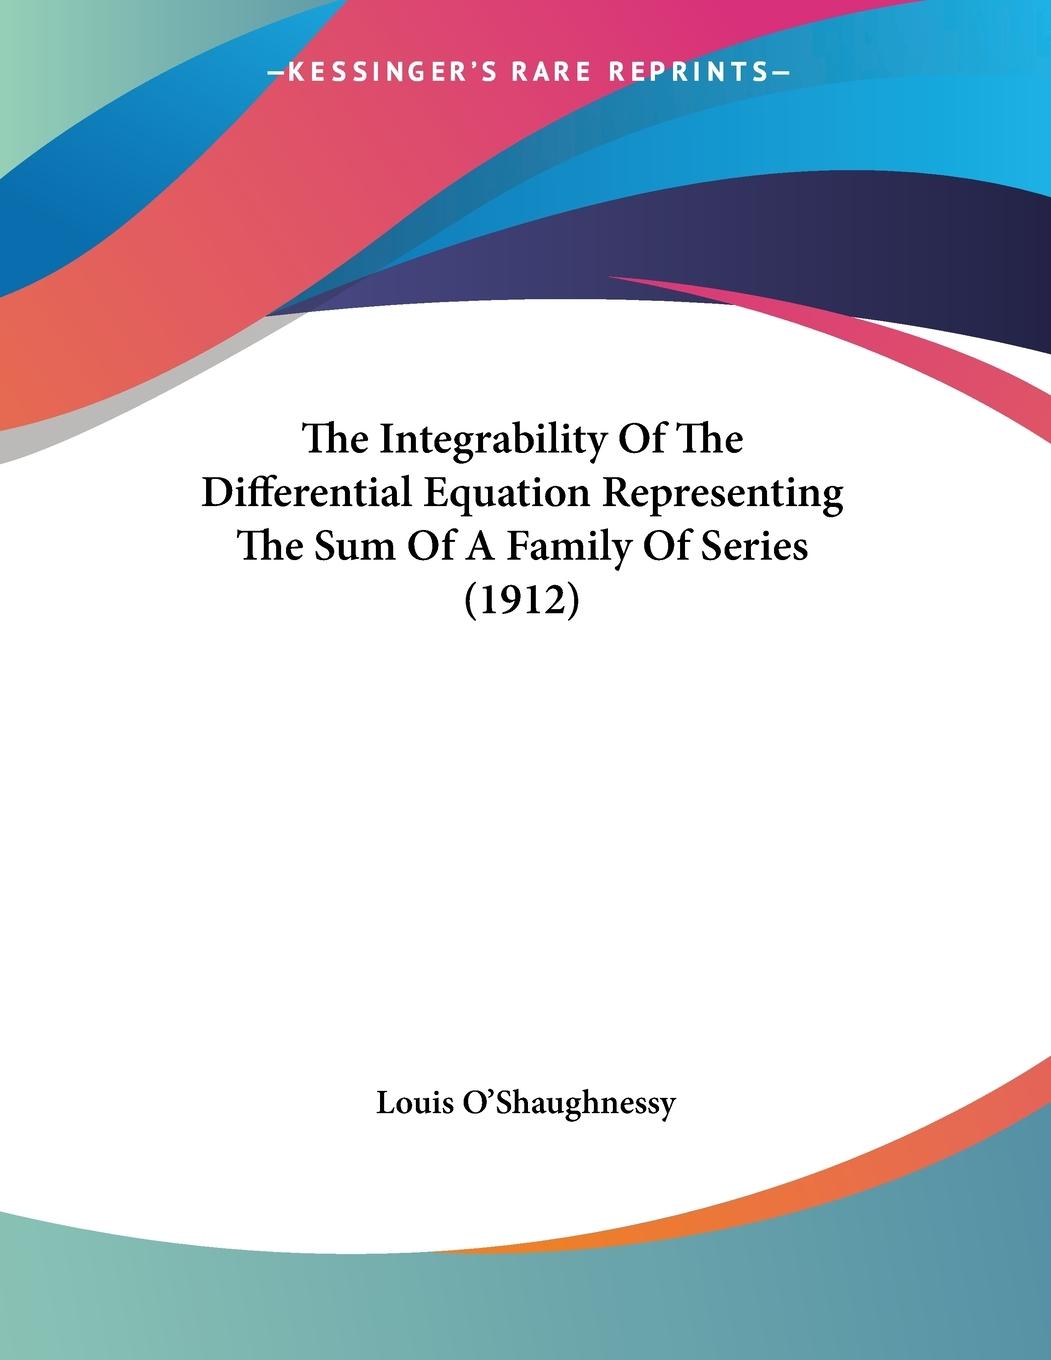 The Integrability Of The Differential Equation Representing The Sum Of A Family Of Series (1912) - O Shaughnessy, Louis